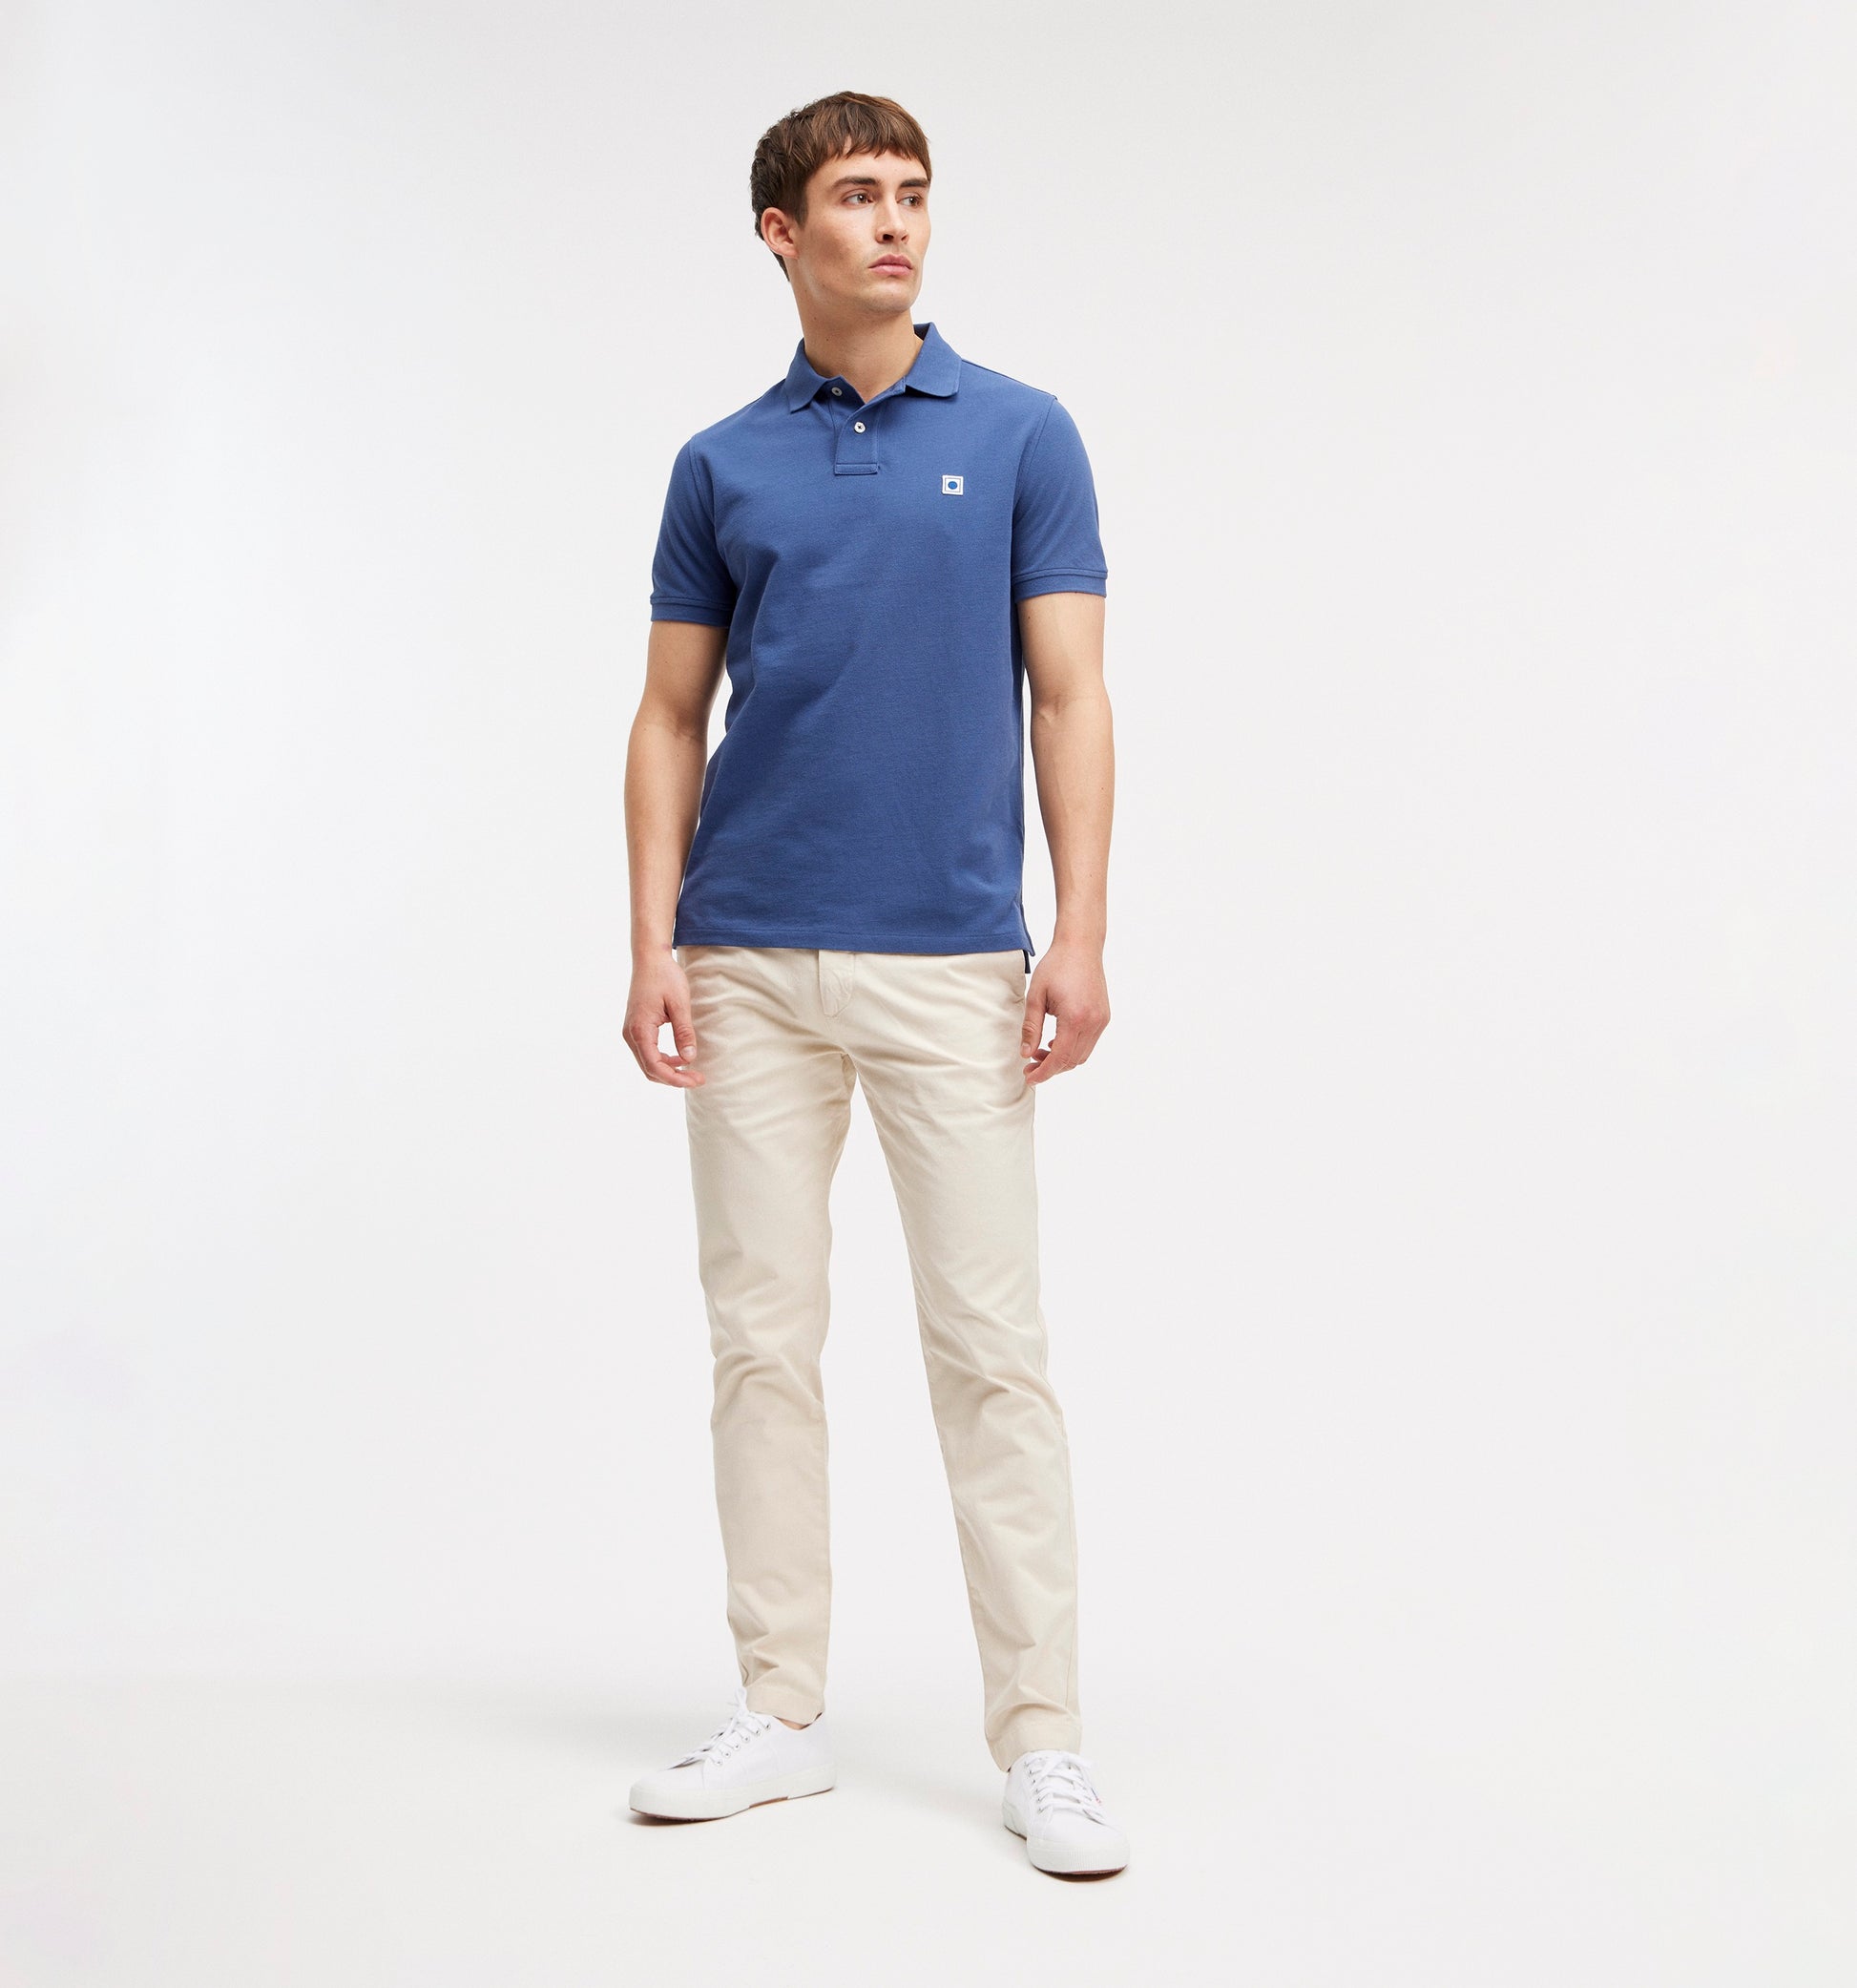 The Rene - Pique Polo In Indigo From King Essentials